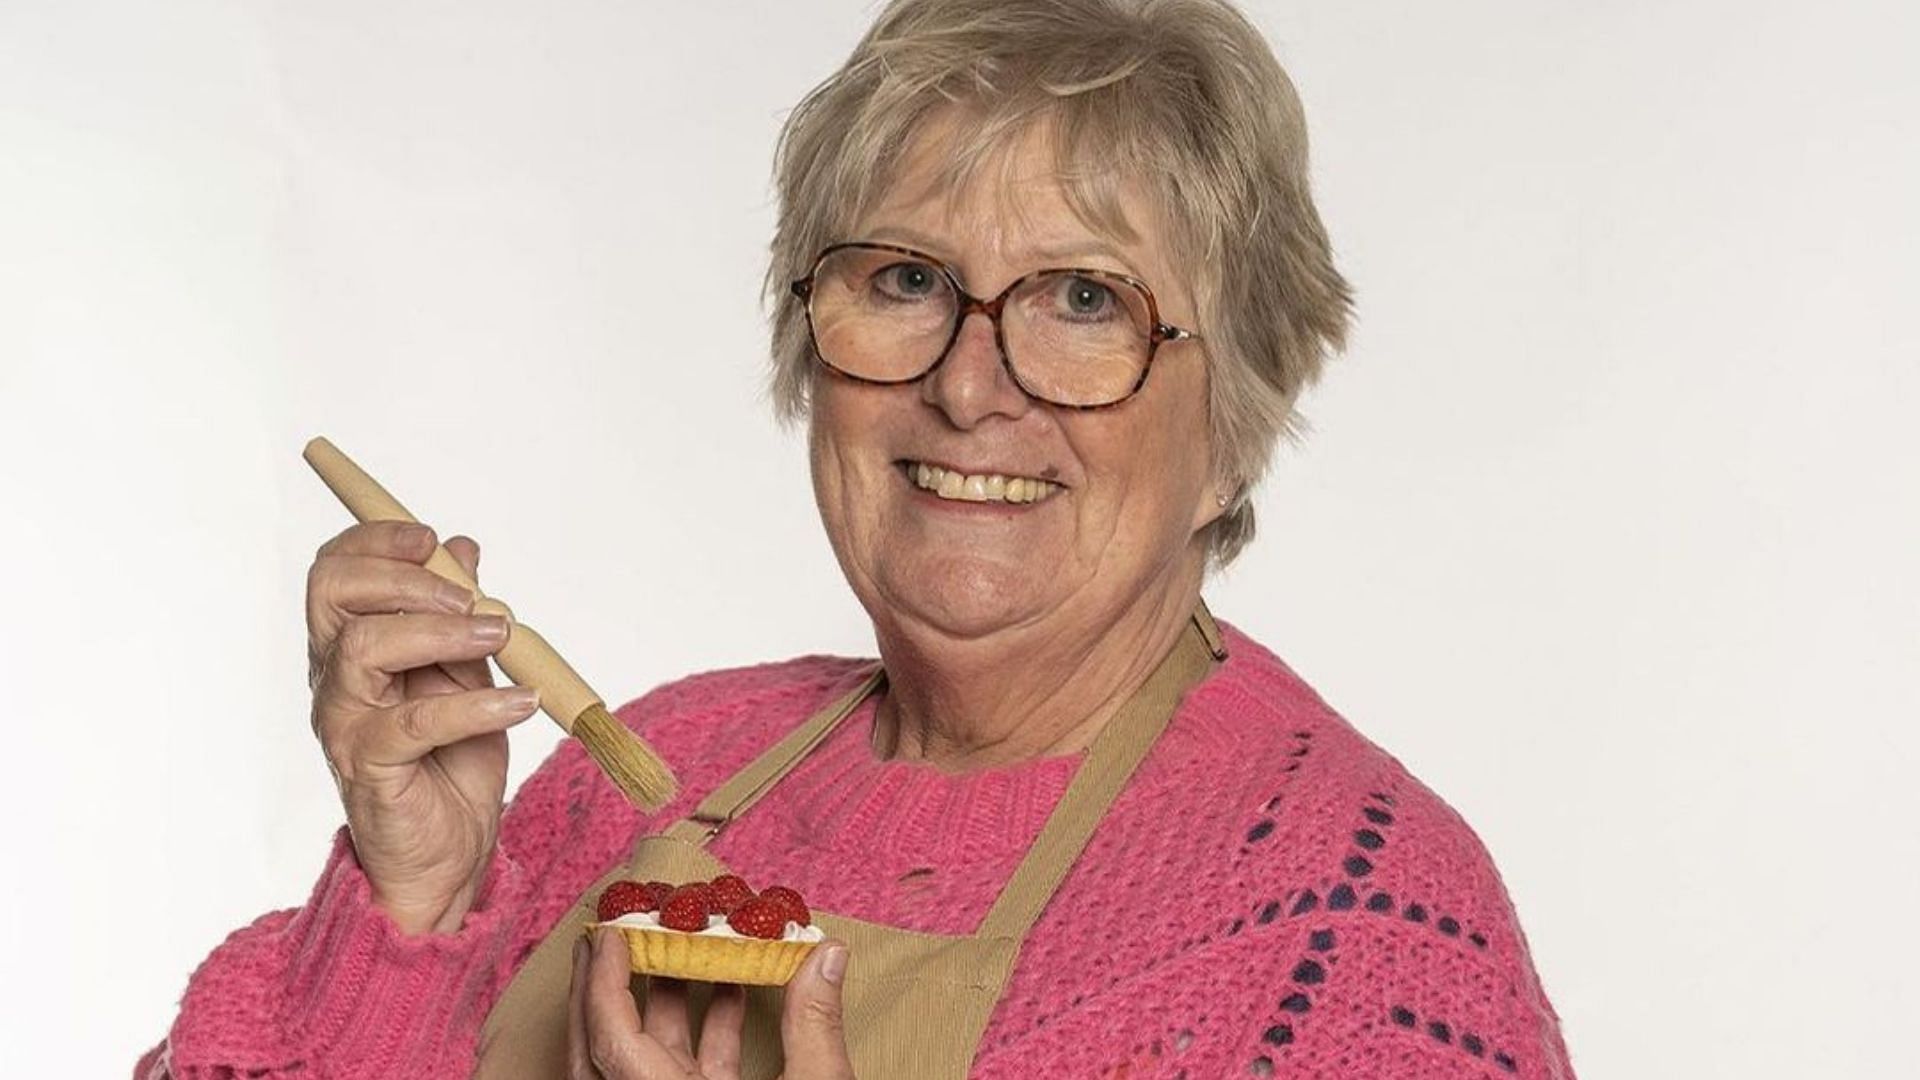 Dawn from The Great British Bake Off 2022 criticised on social media for working under Boris Johnson (Image via thebakerdawn/Instagram)